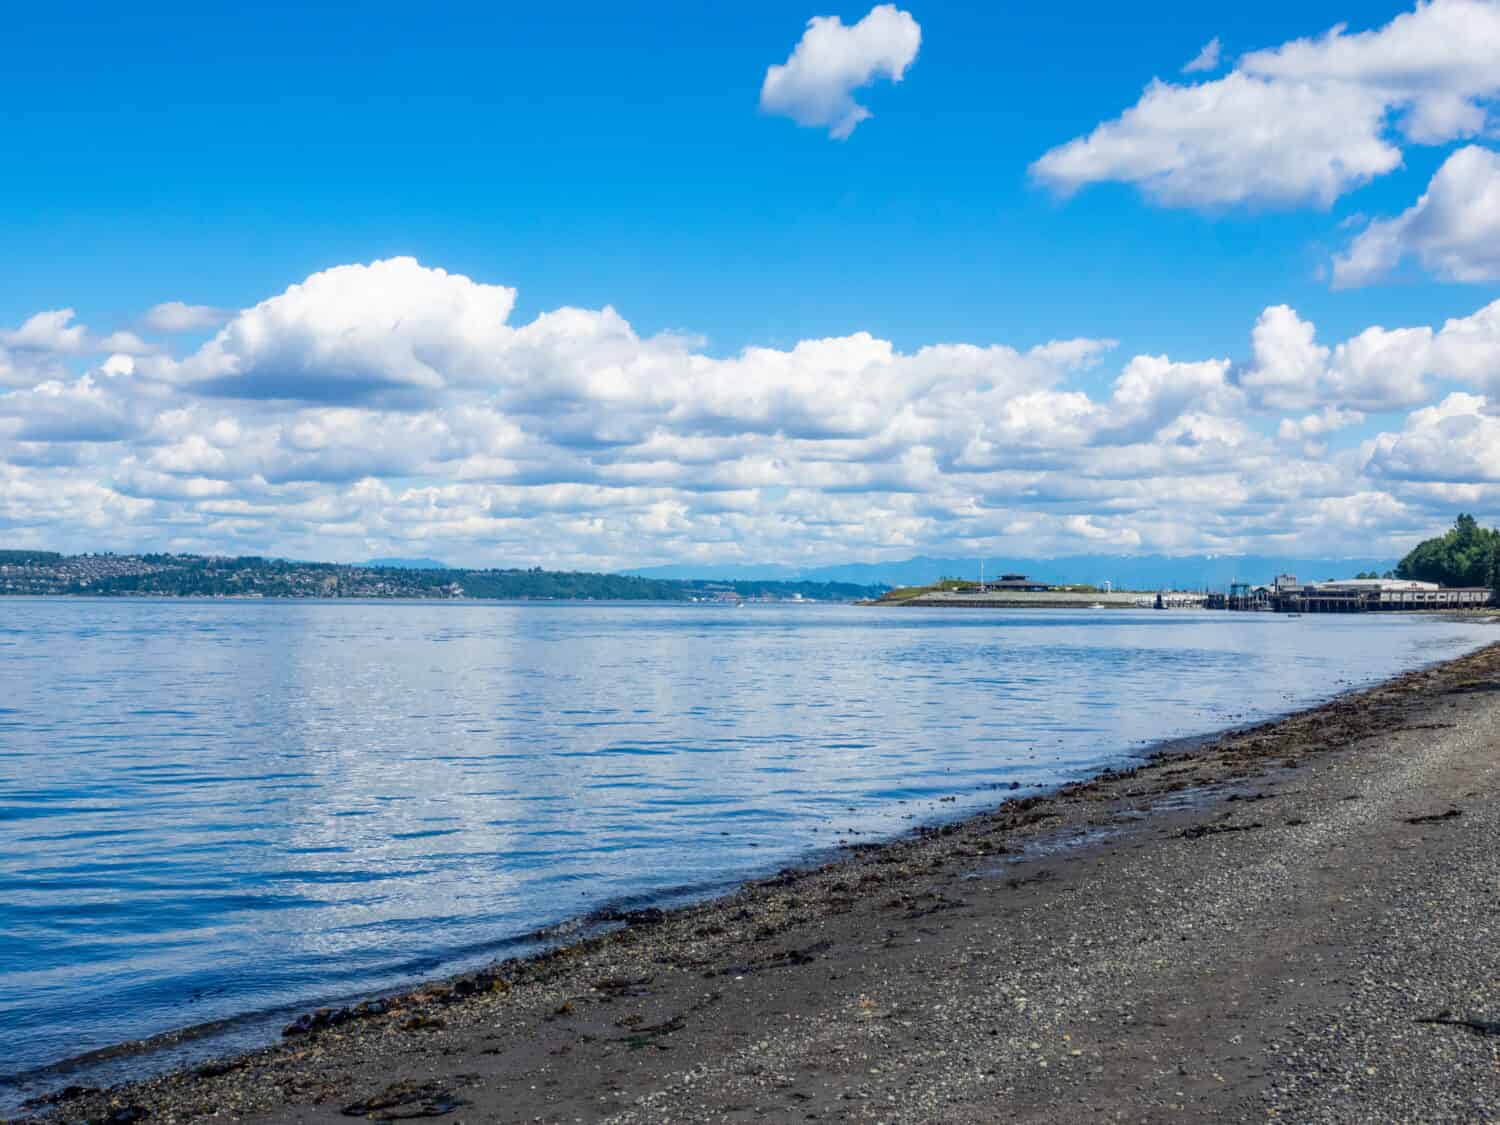 Owen Beach is waterfront park with picnic shelters, grills, kayak rentals & views of Vashon Island.